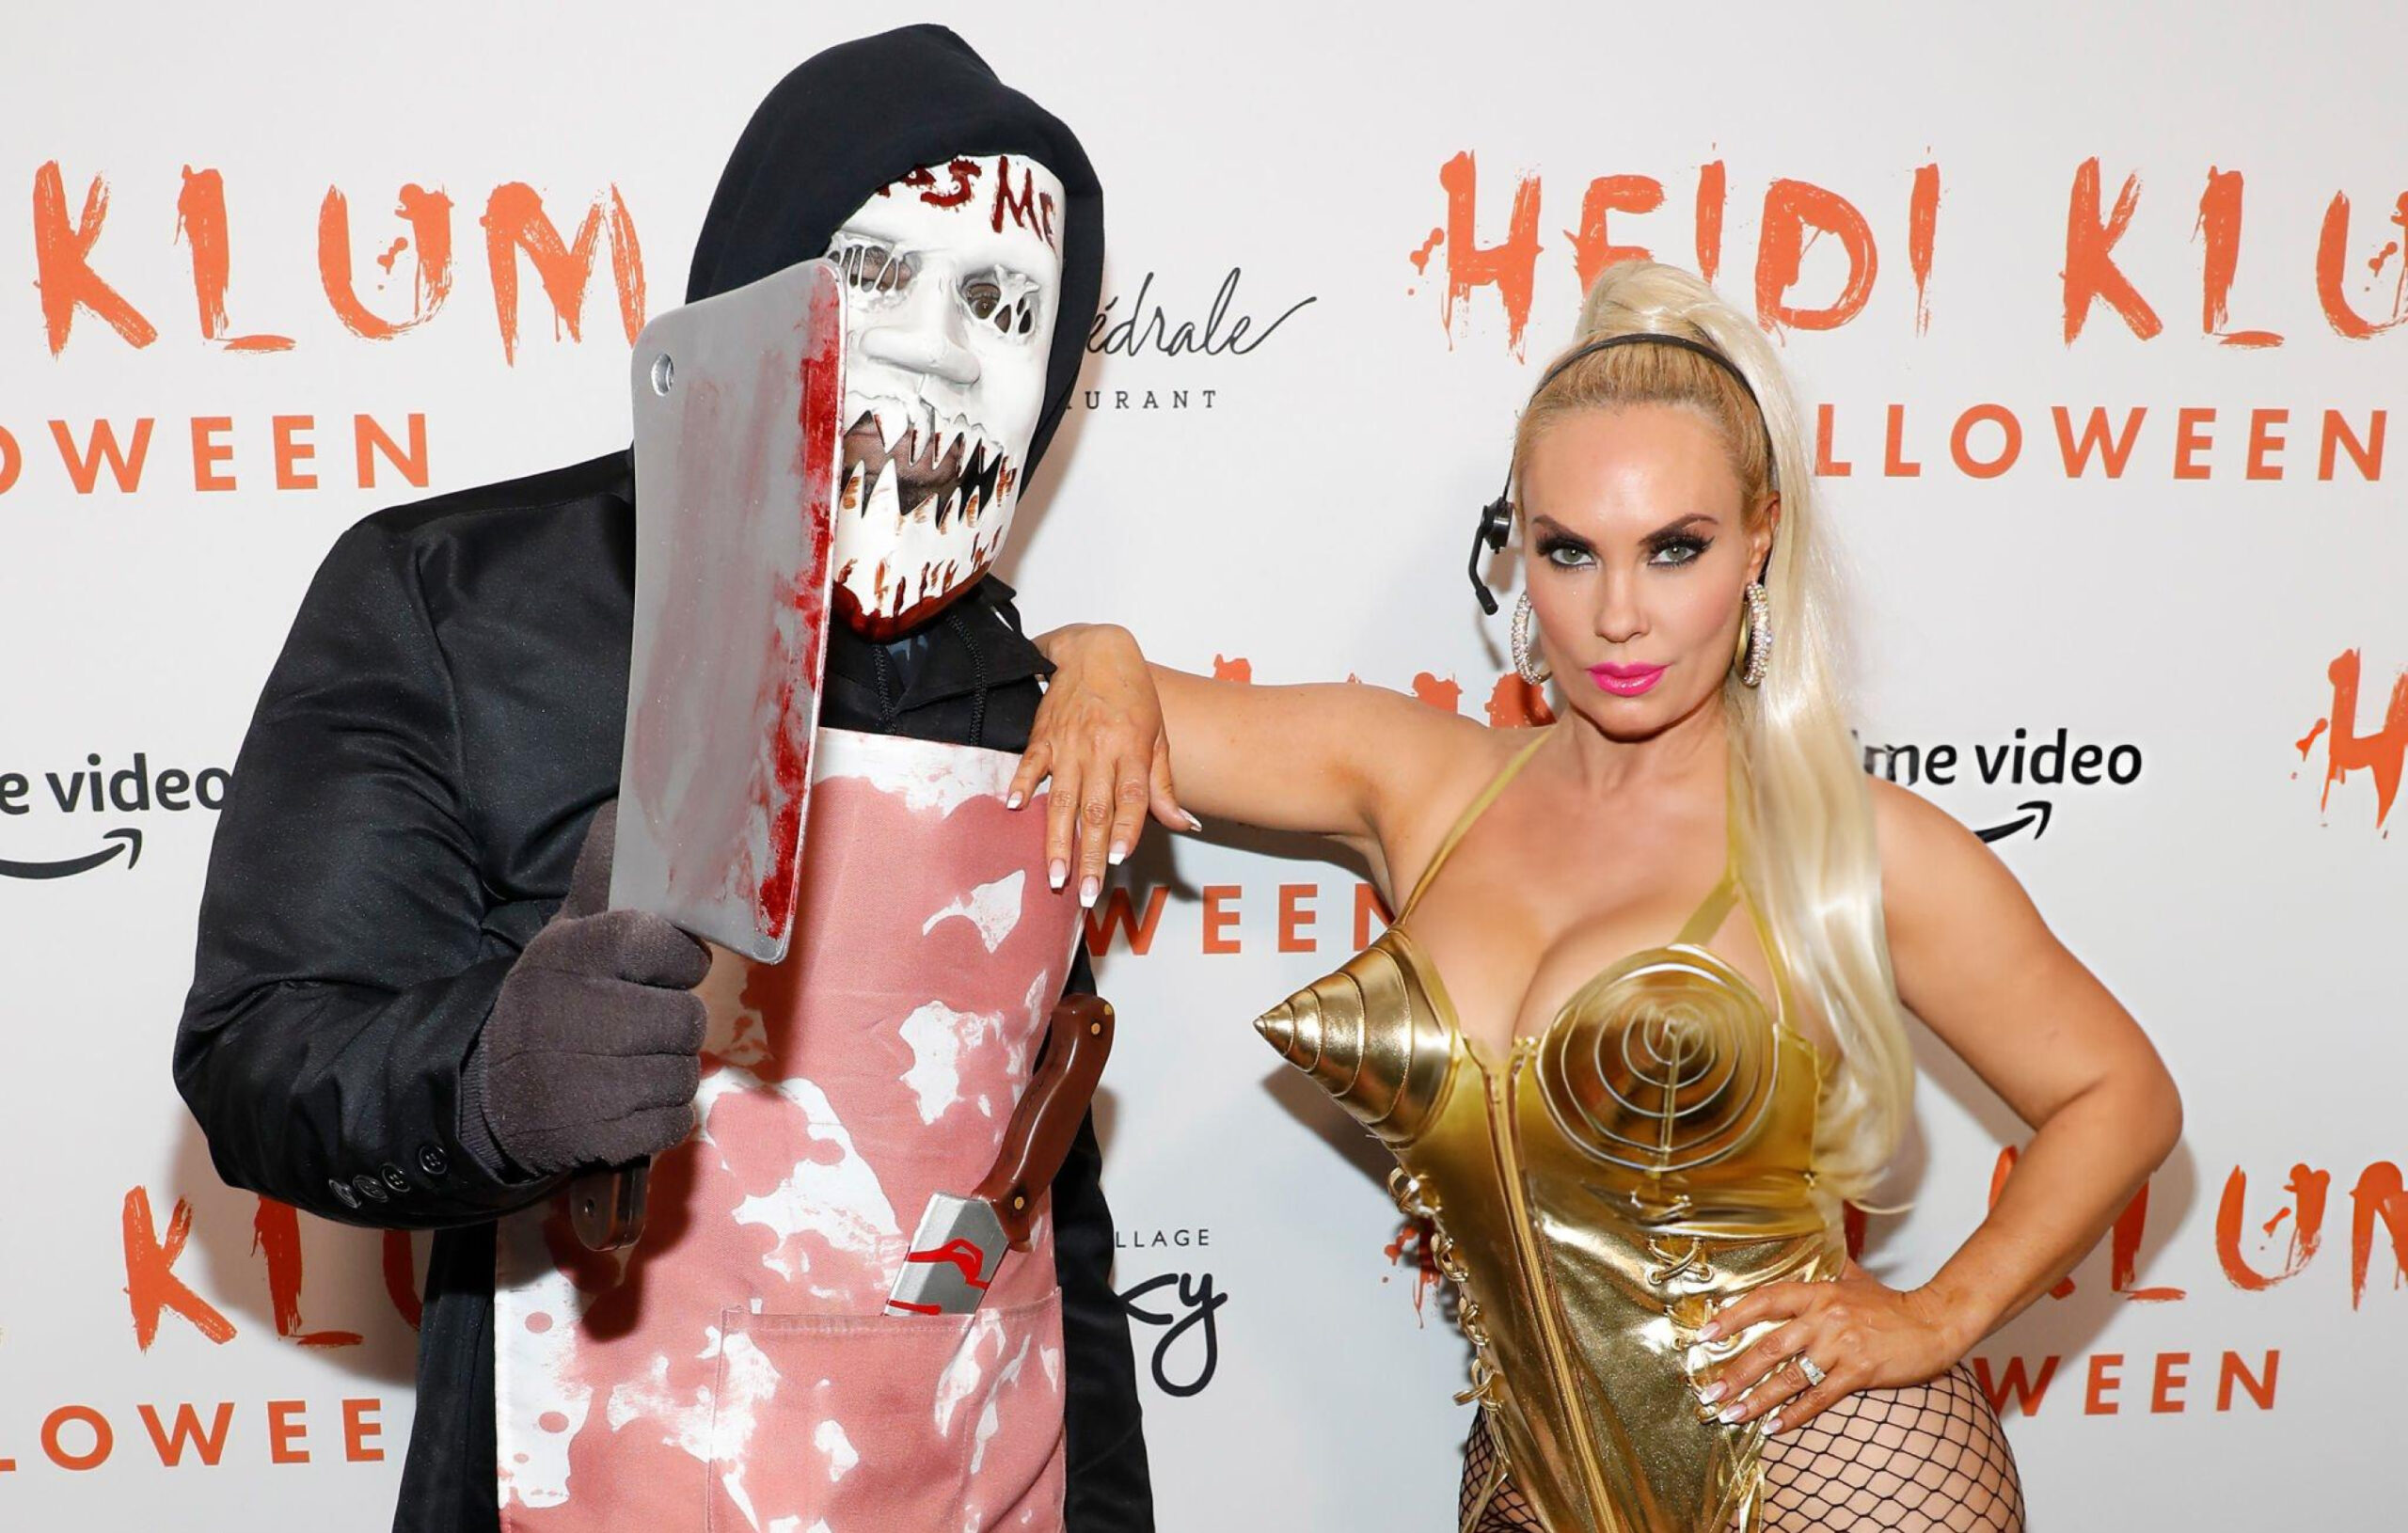 Ice-T and Coco Austin attend Heidi Klum's 20th Annual Halloween Party presented by Amazon Prime Video and SVEDKA Vodka at Cathédrale New York on October 31, 2019 in New York City.